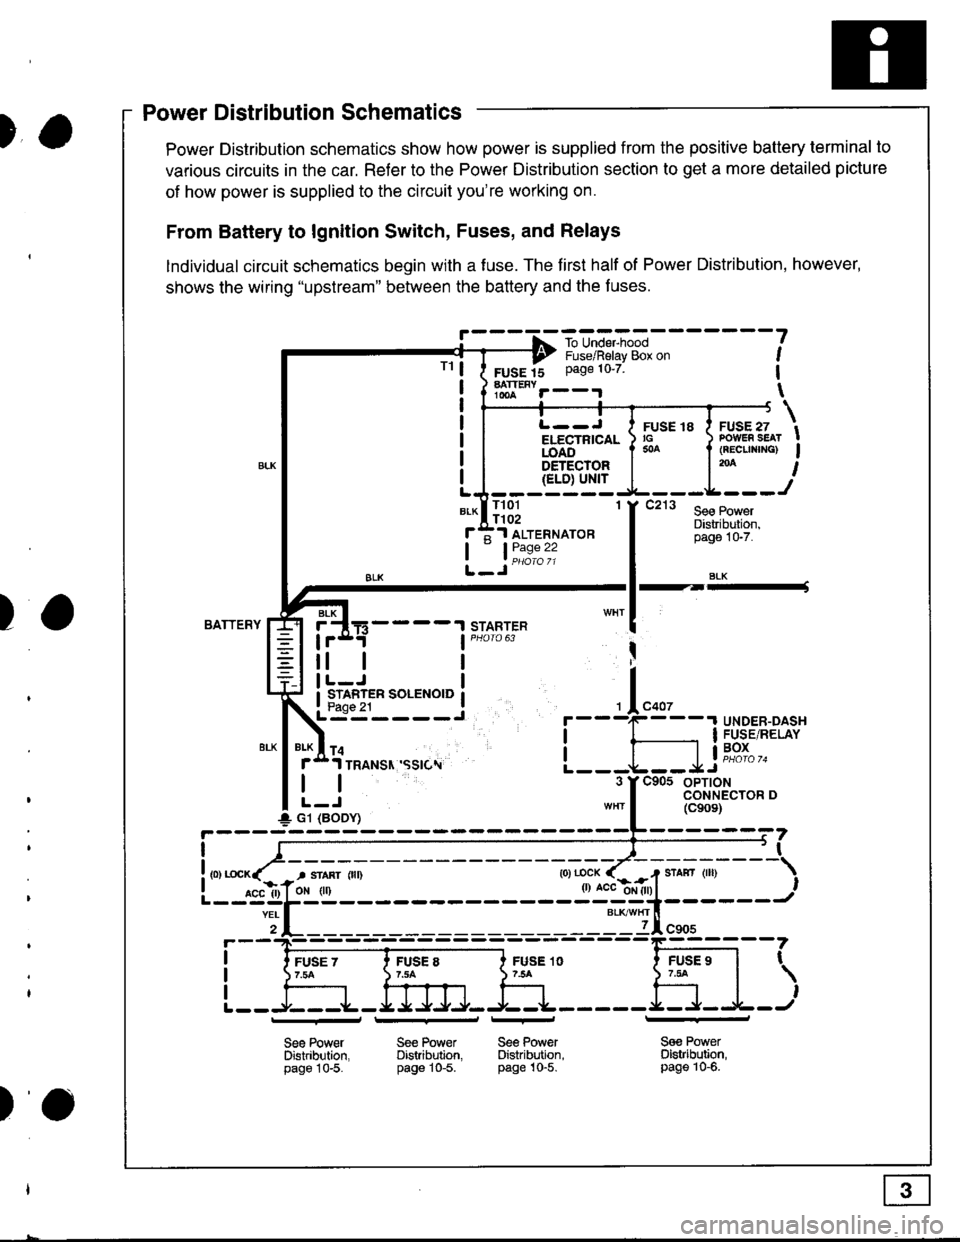 HONDA INTEGRA 1998 4.G Workshop Manual )o
)a
)wer IJrstnDullon Scnemallcs -
Power Distribution schematics show how power is supplied from the positive battery terminal to
various circuits in the car. Refer to the Power Distribution section